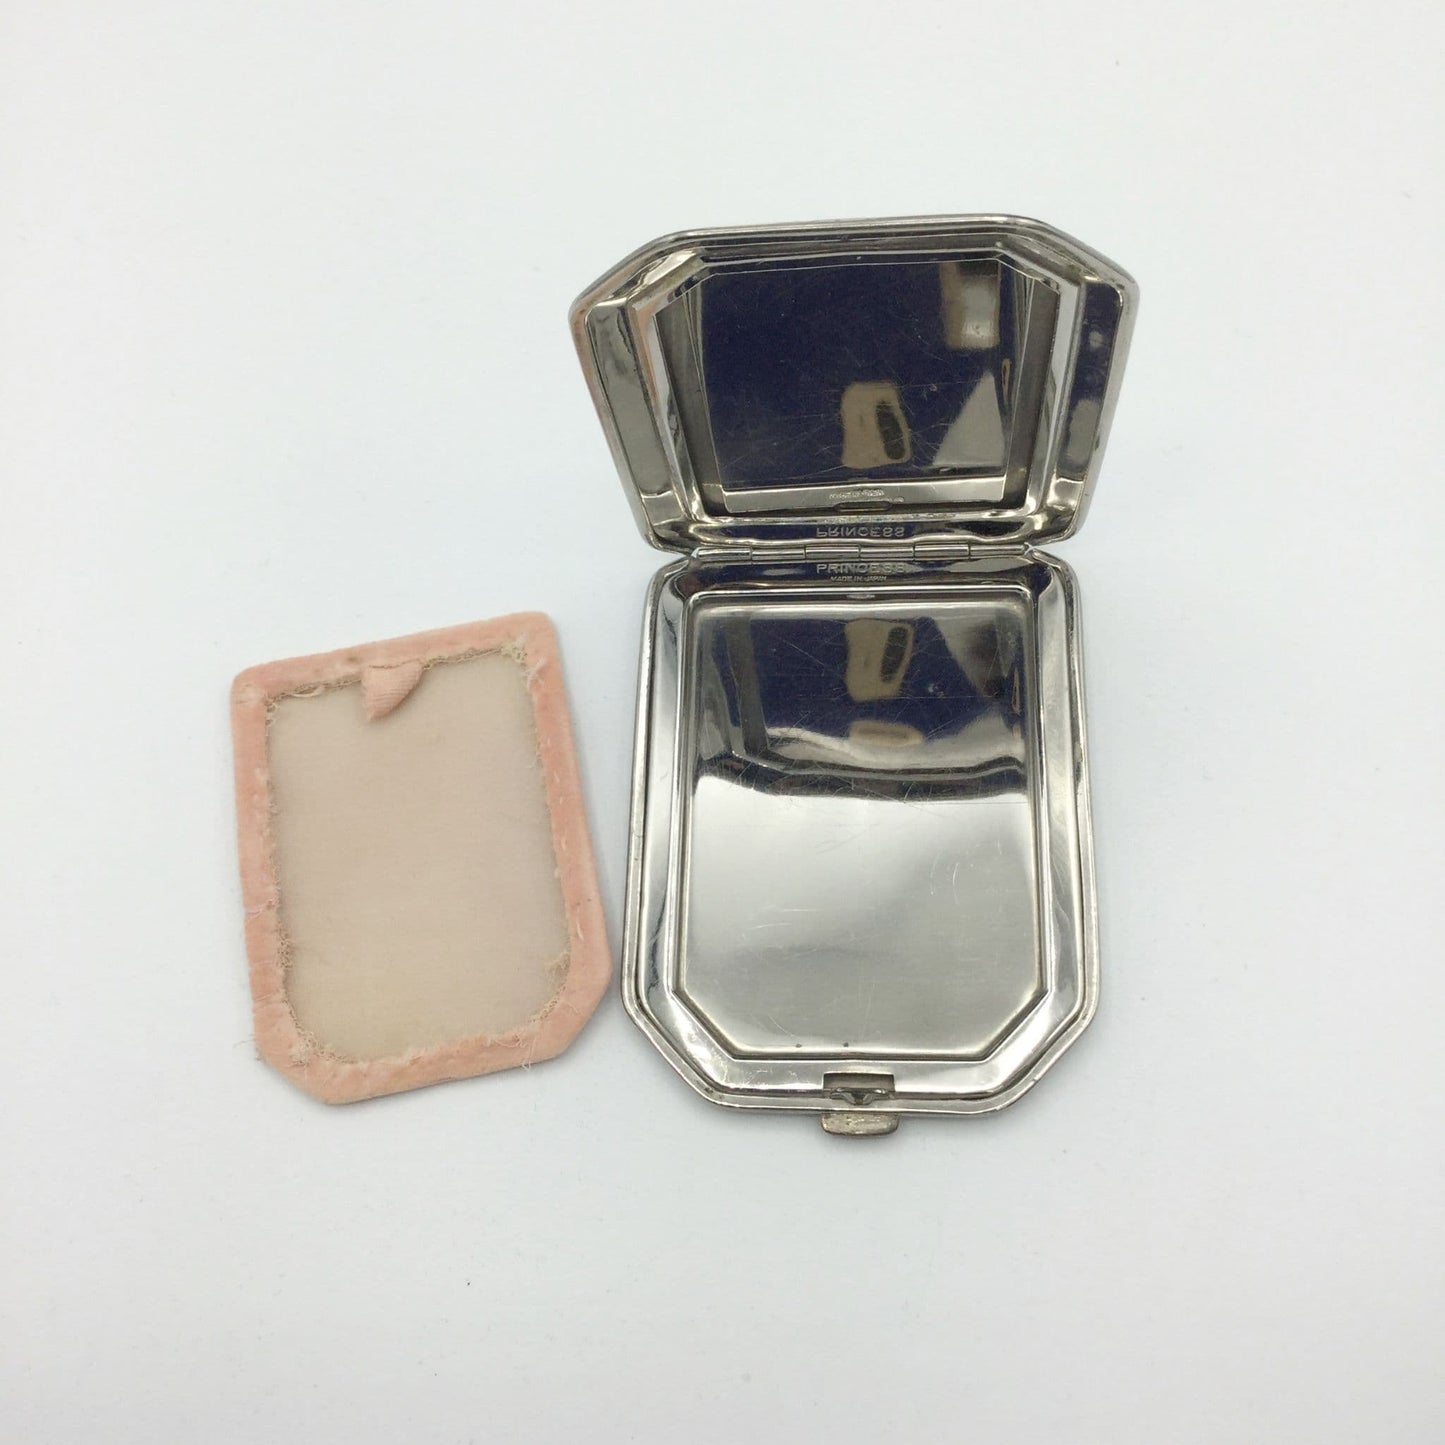 very reflective mirror of the art deco compact with the powder screen to one side